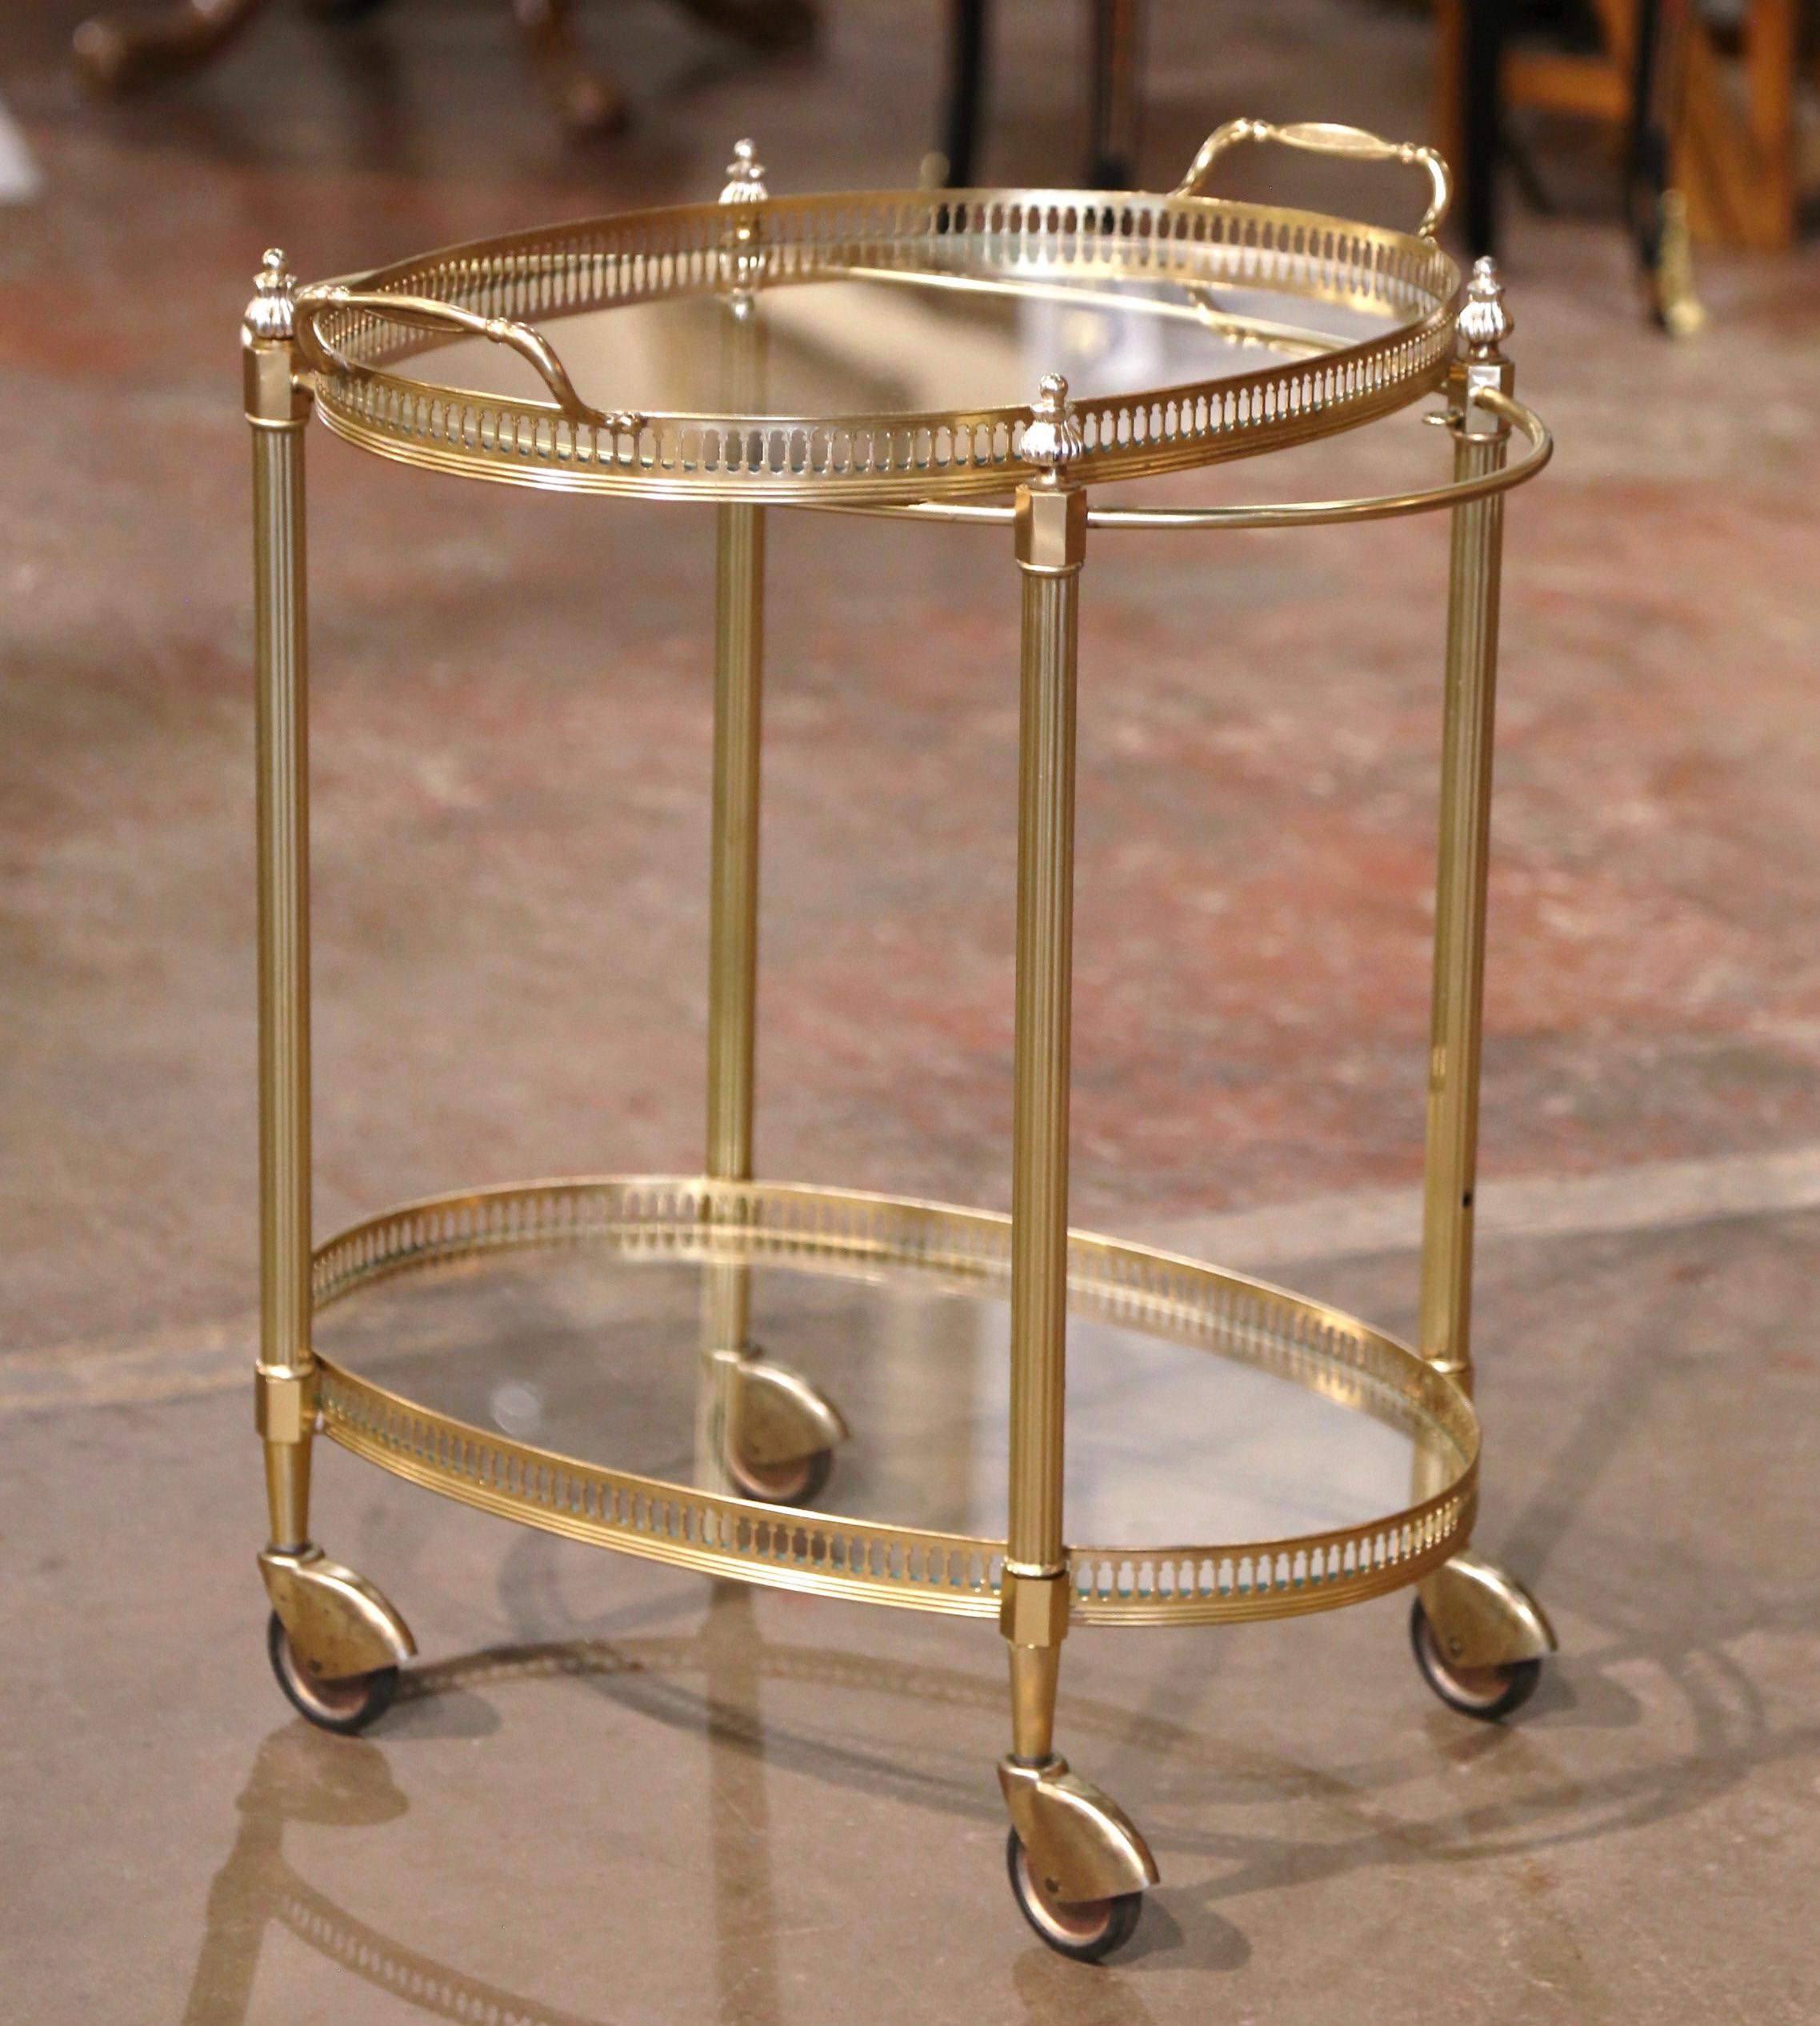 20th Century Mid-Century French Gilt Brass Oval Two-Tier Service Trolley Bar Cart For Sale